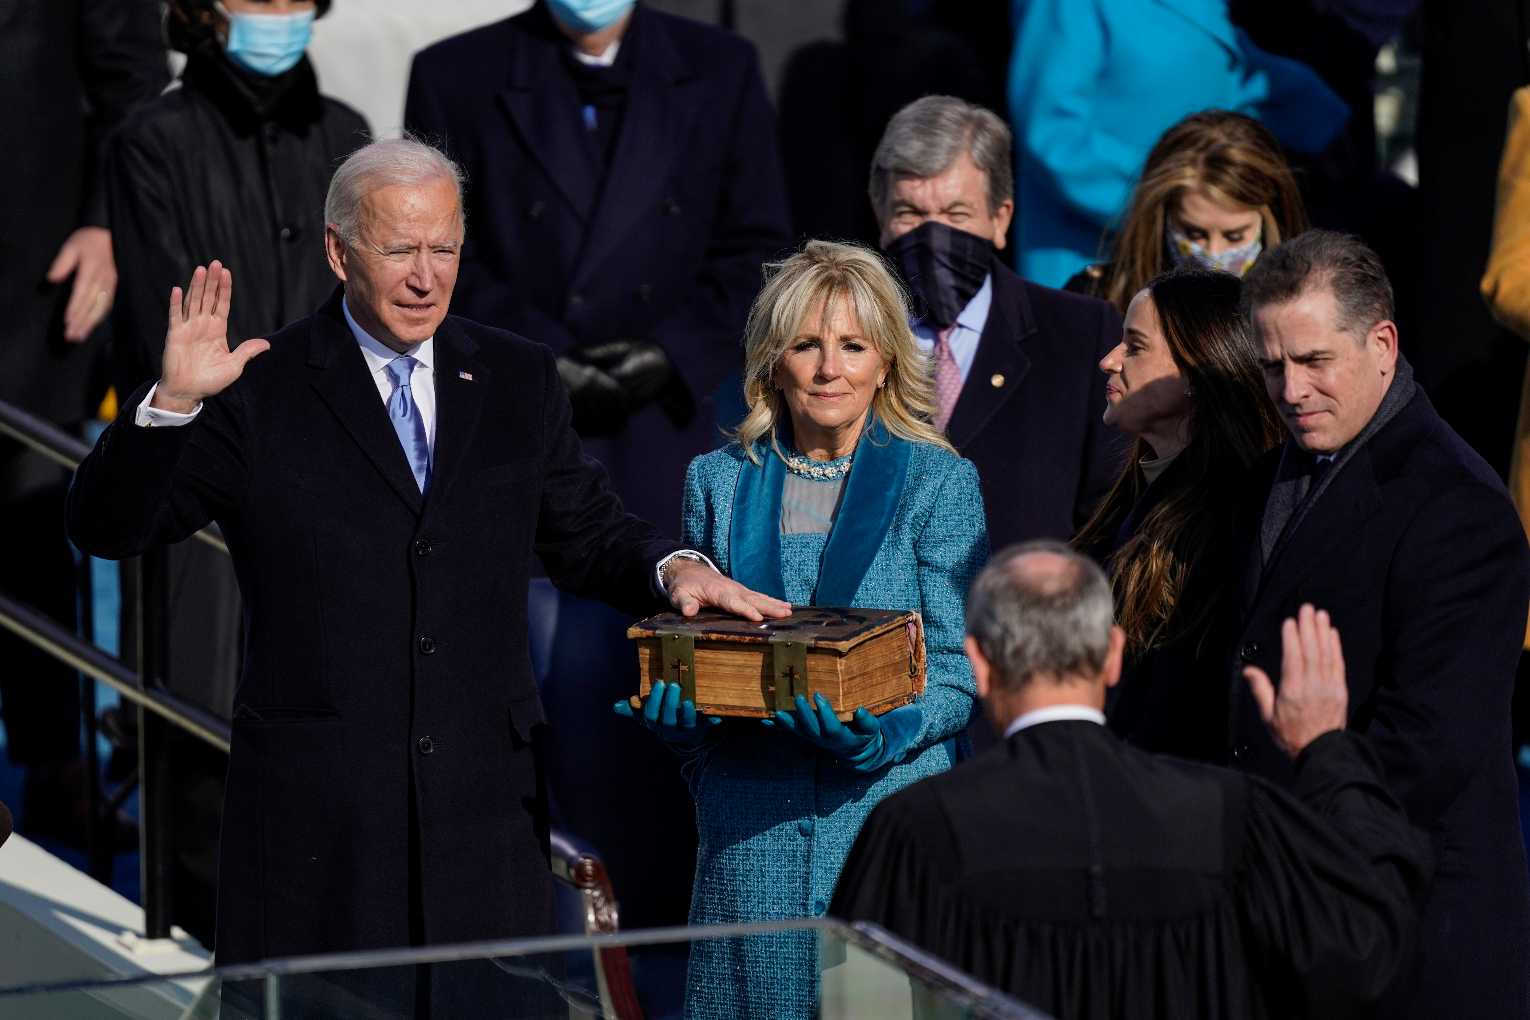 OPINION: Biden has plans for college will benefit students